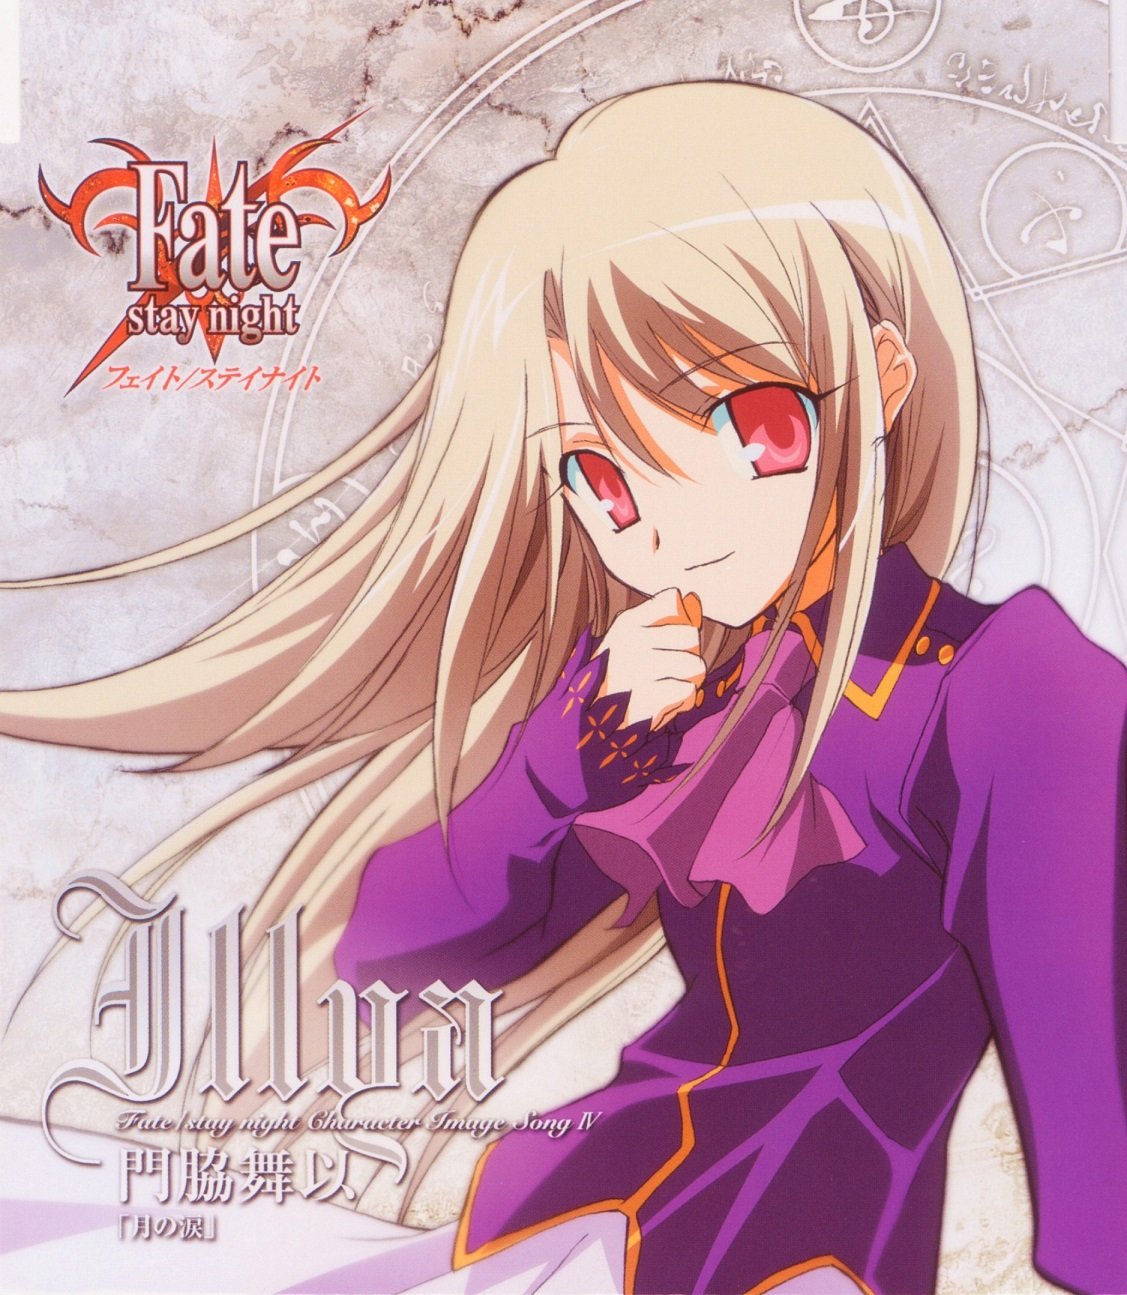 Fate/stay night Character Image Song IV: Illya — 門脇舞以